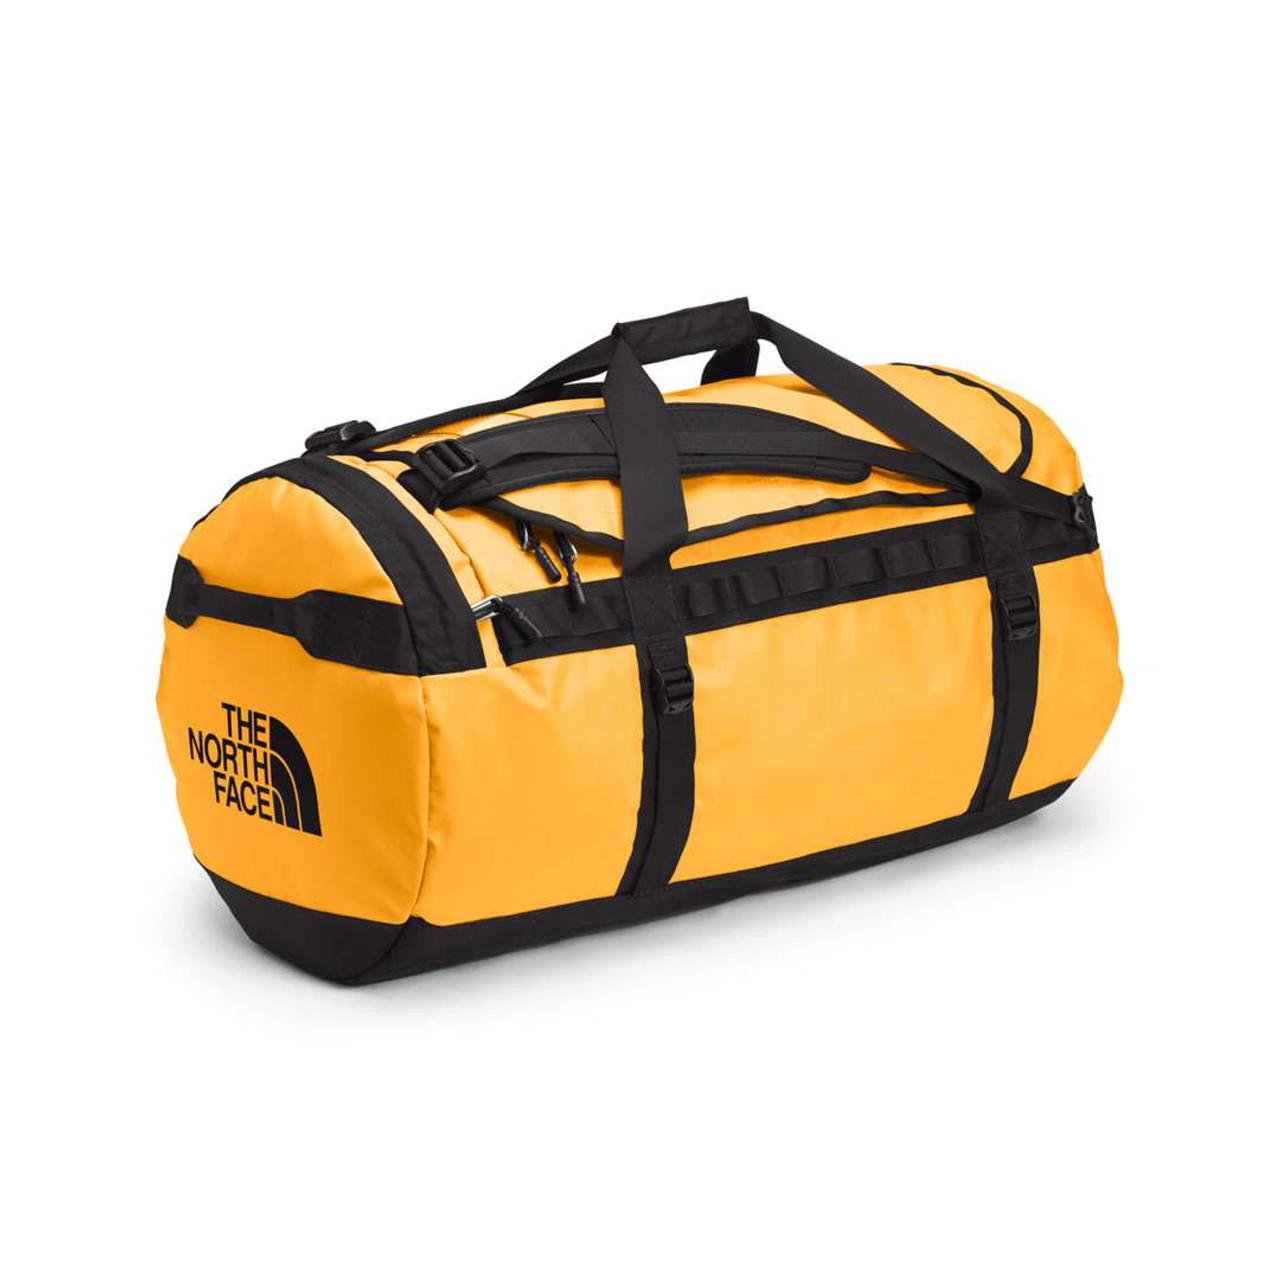 The North Face Large Base Camp Duffel Bag